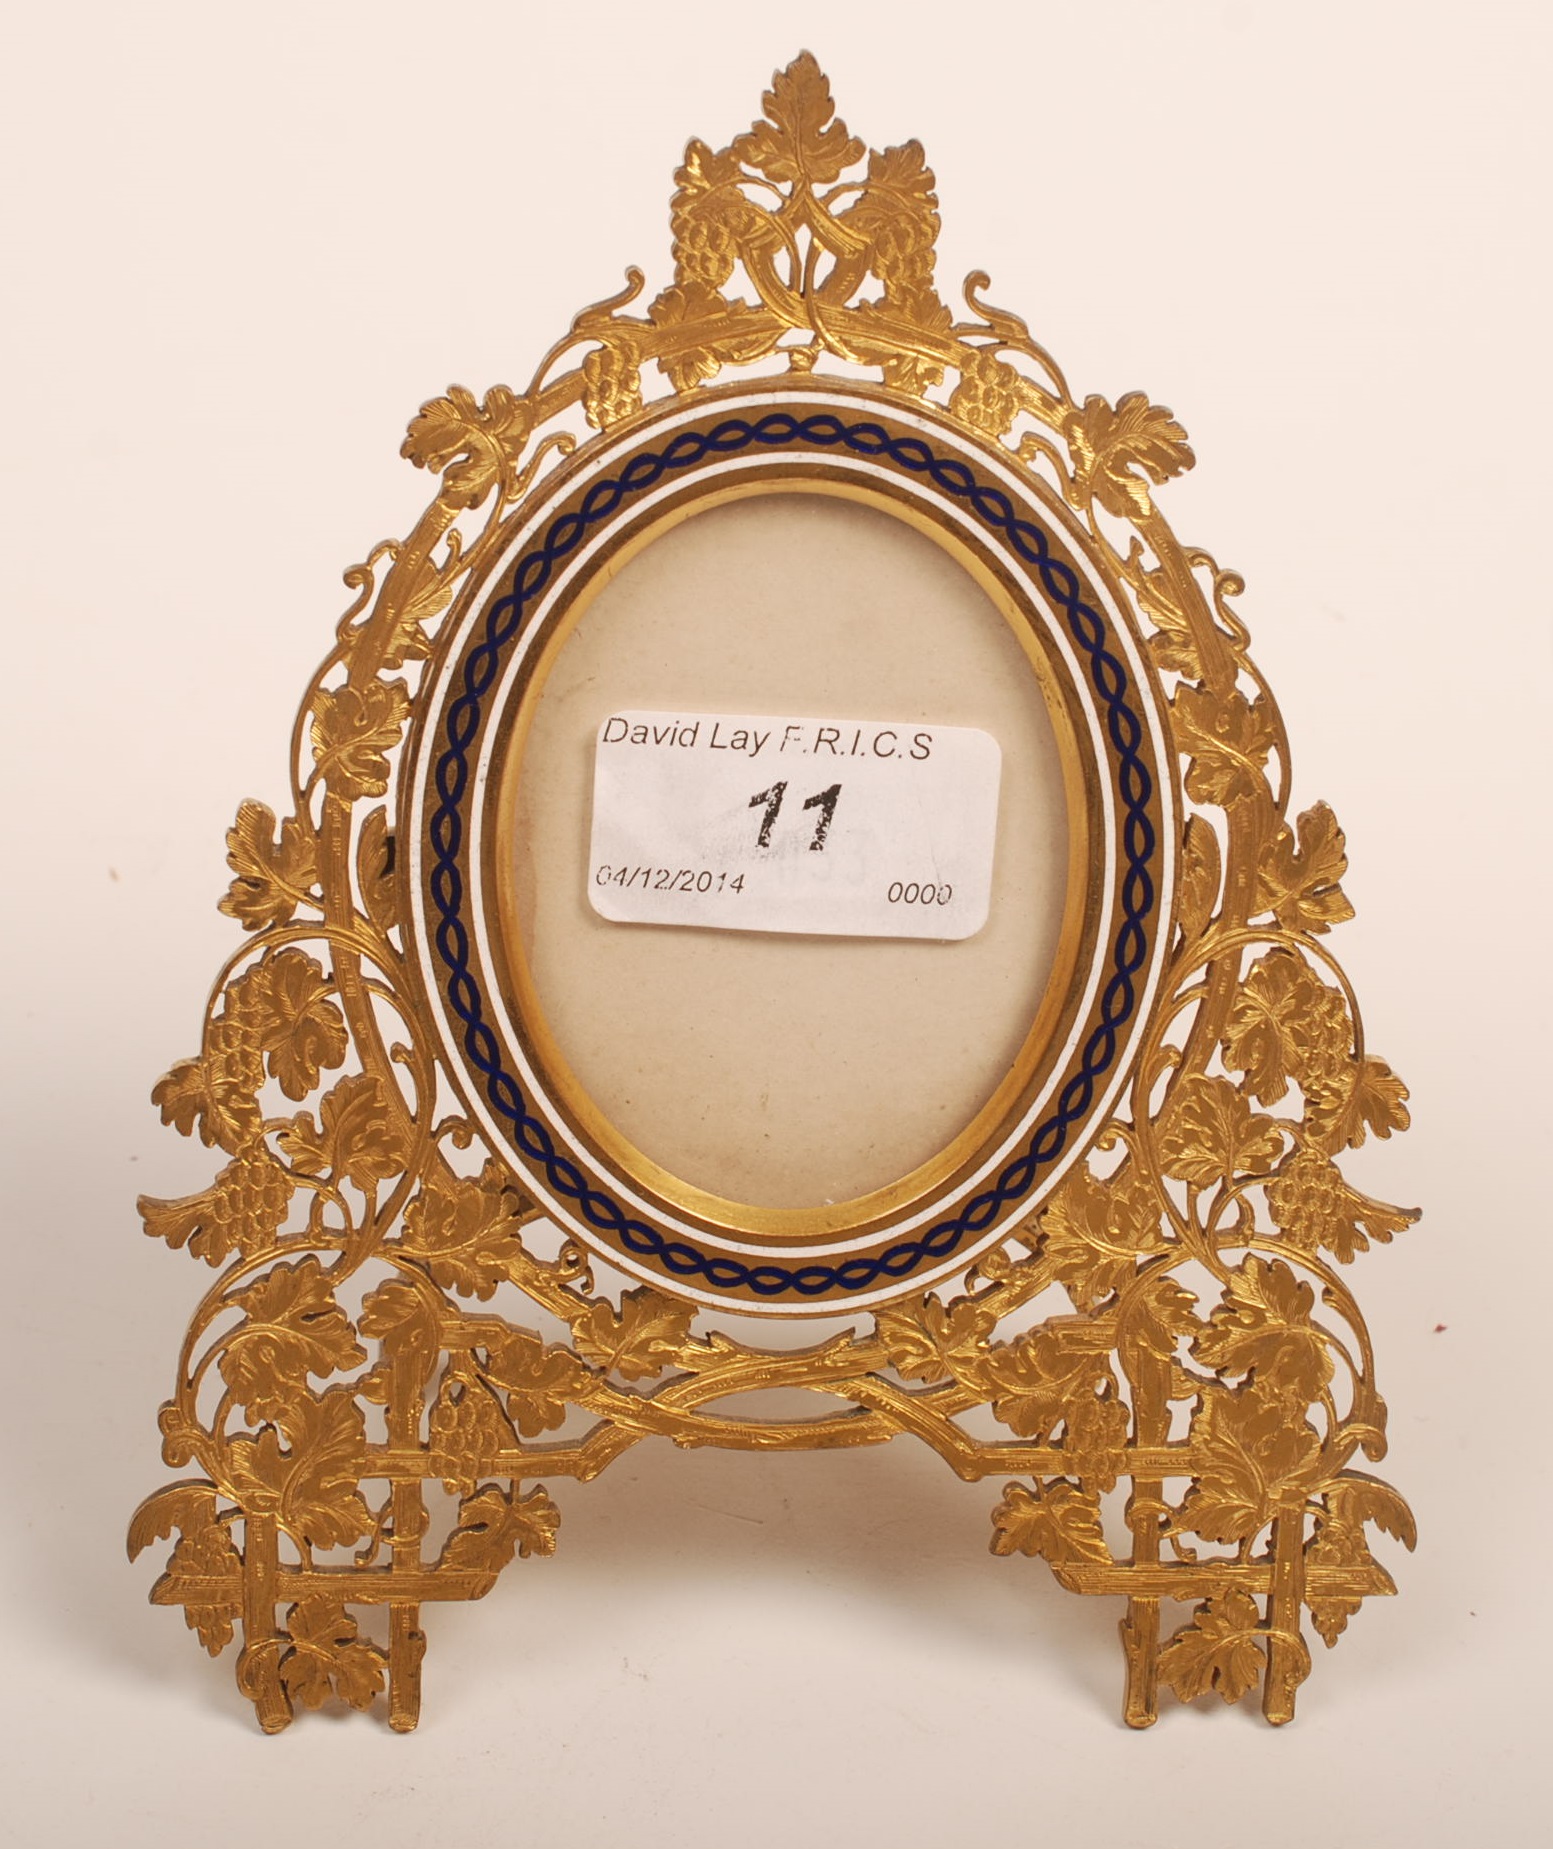 A fine mid 19th century English easel miniature frame with a blue and white enamel oval band